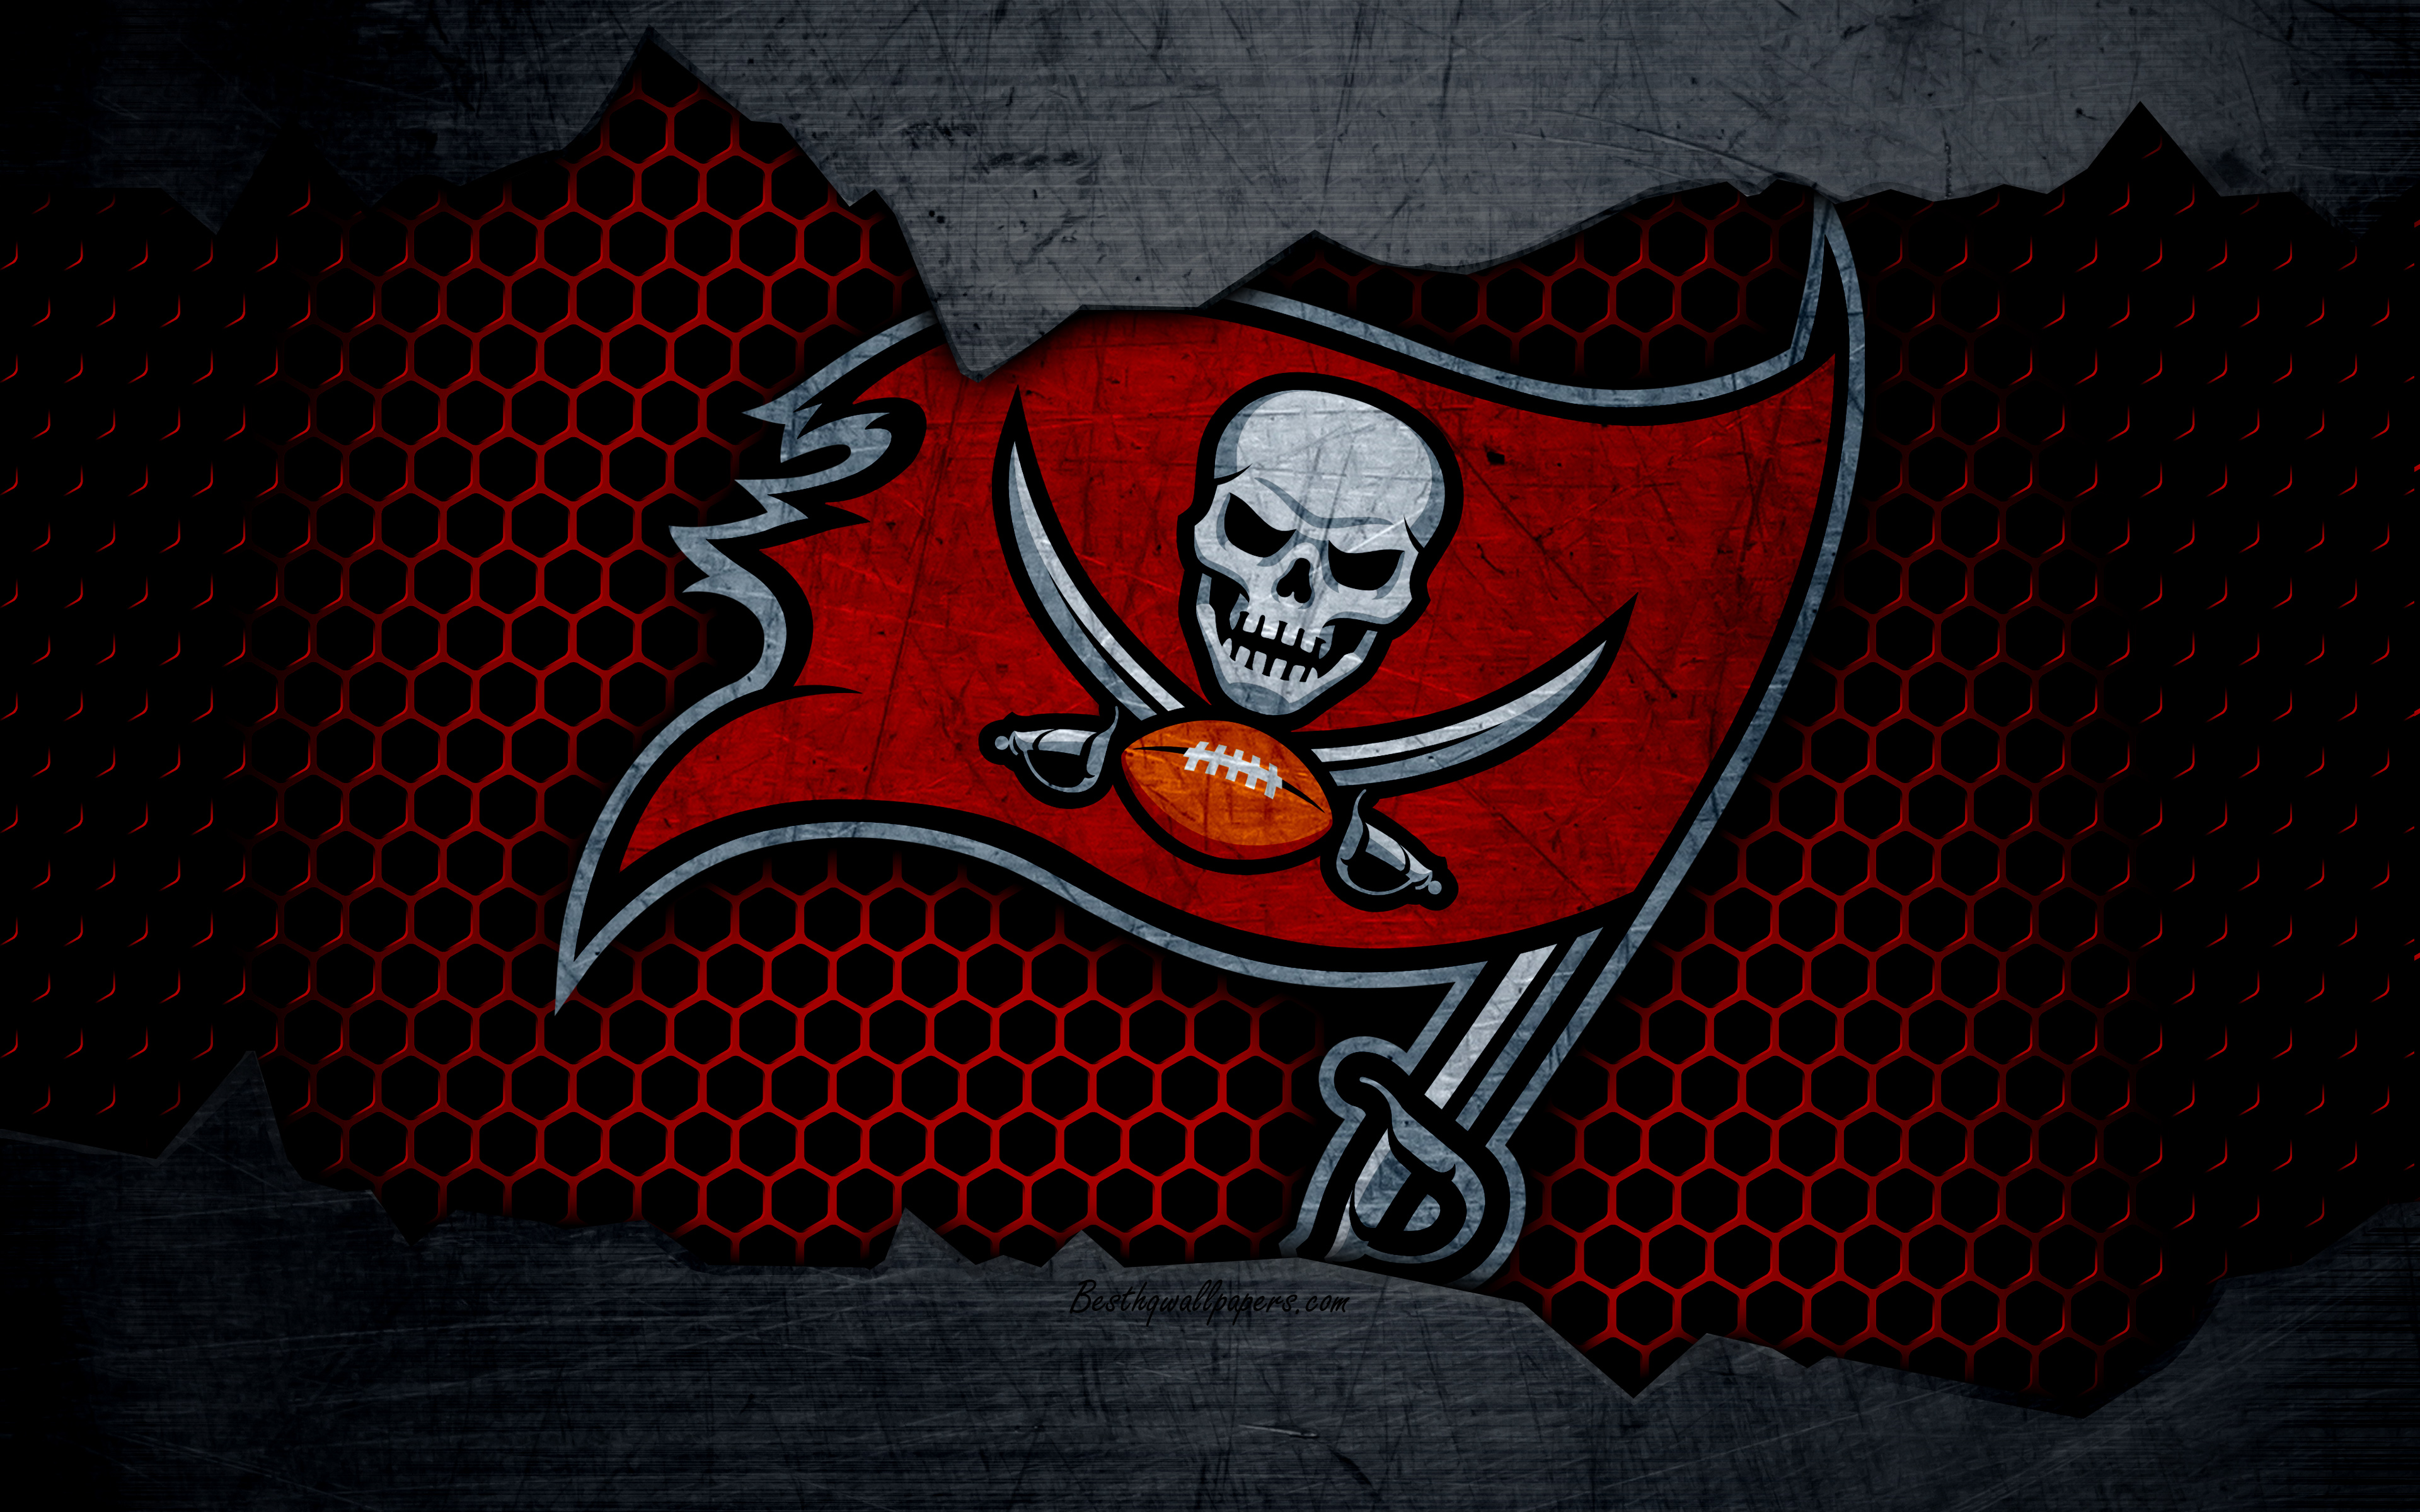 Download wallpaper Tampa Bay Buccaneers, 4k, logo, NFL, american football, NFC, USA, grunge, metal texture, South Division for desktop with resolution 3840x2400. High Quality HD picture wallpaper